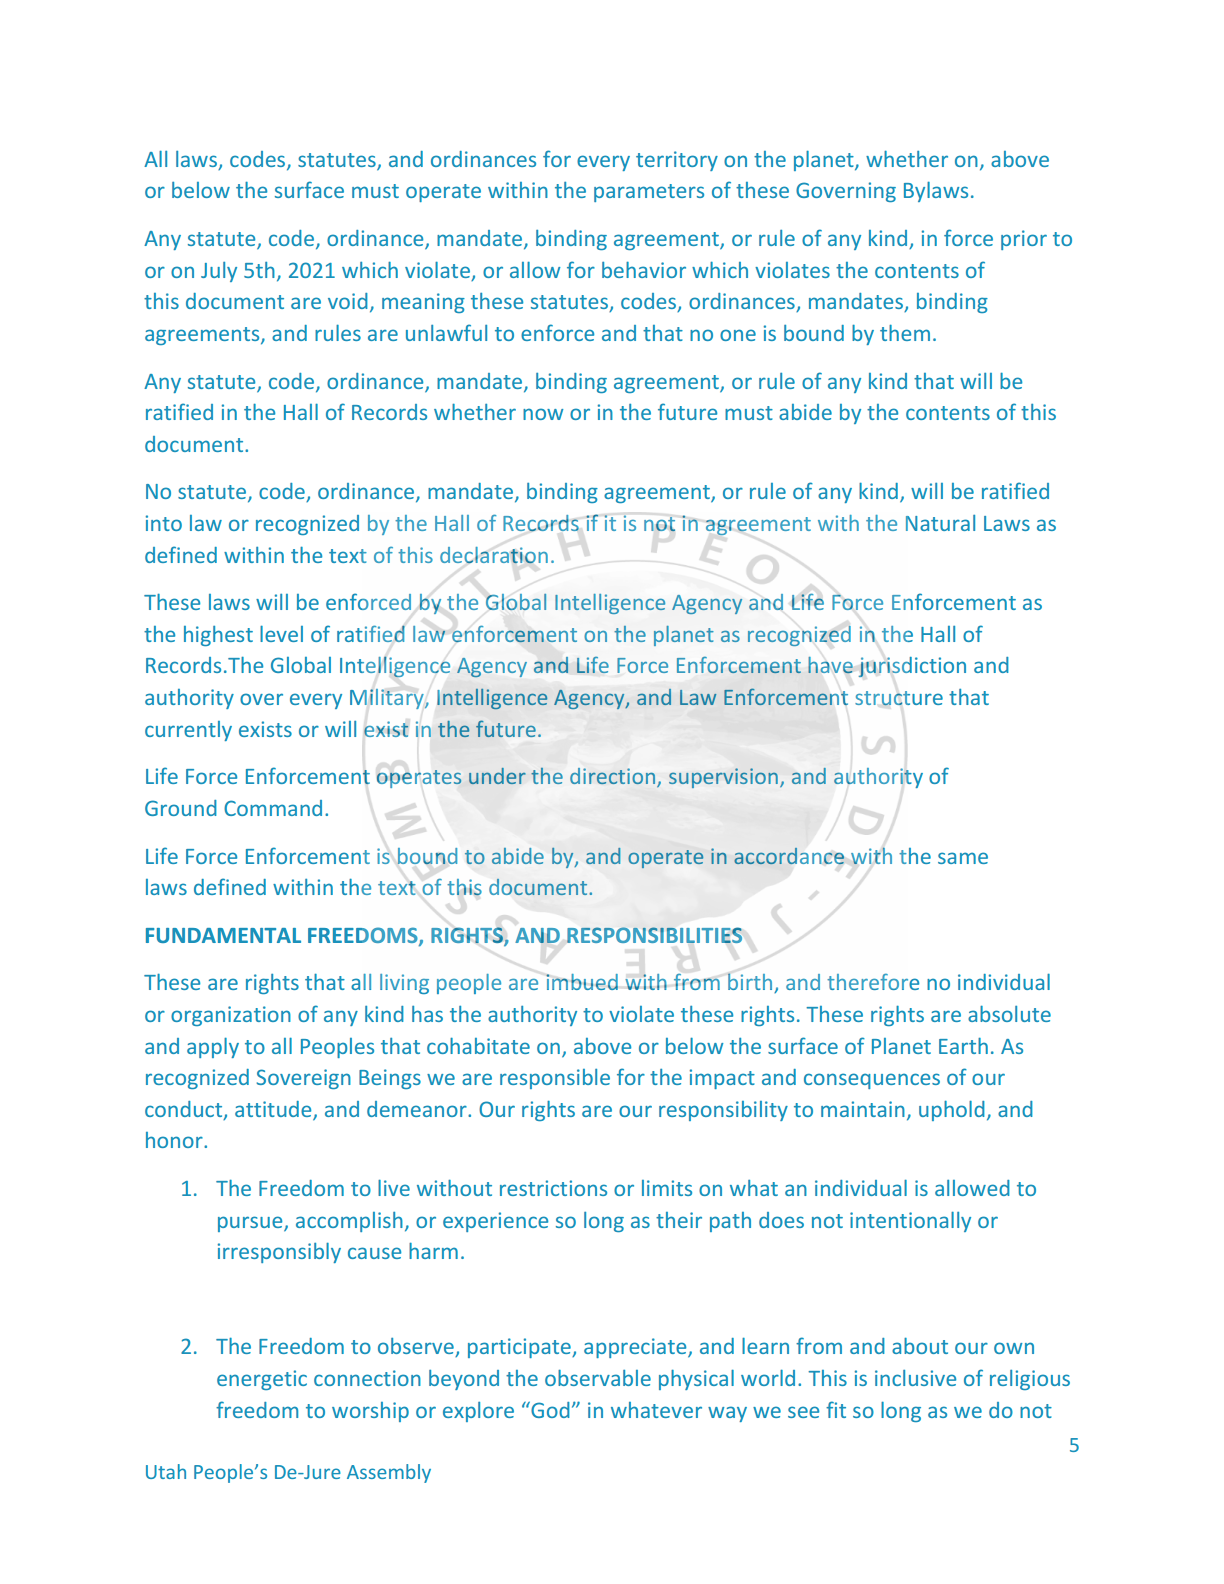 New Declaration of Independencepng_Page5